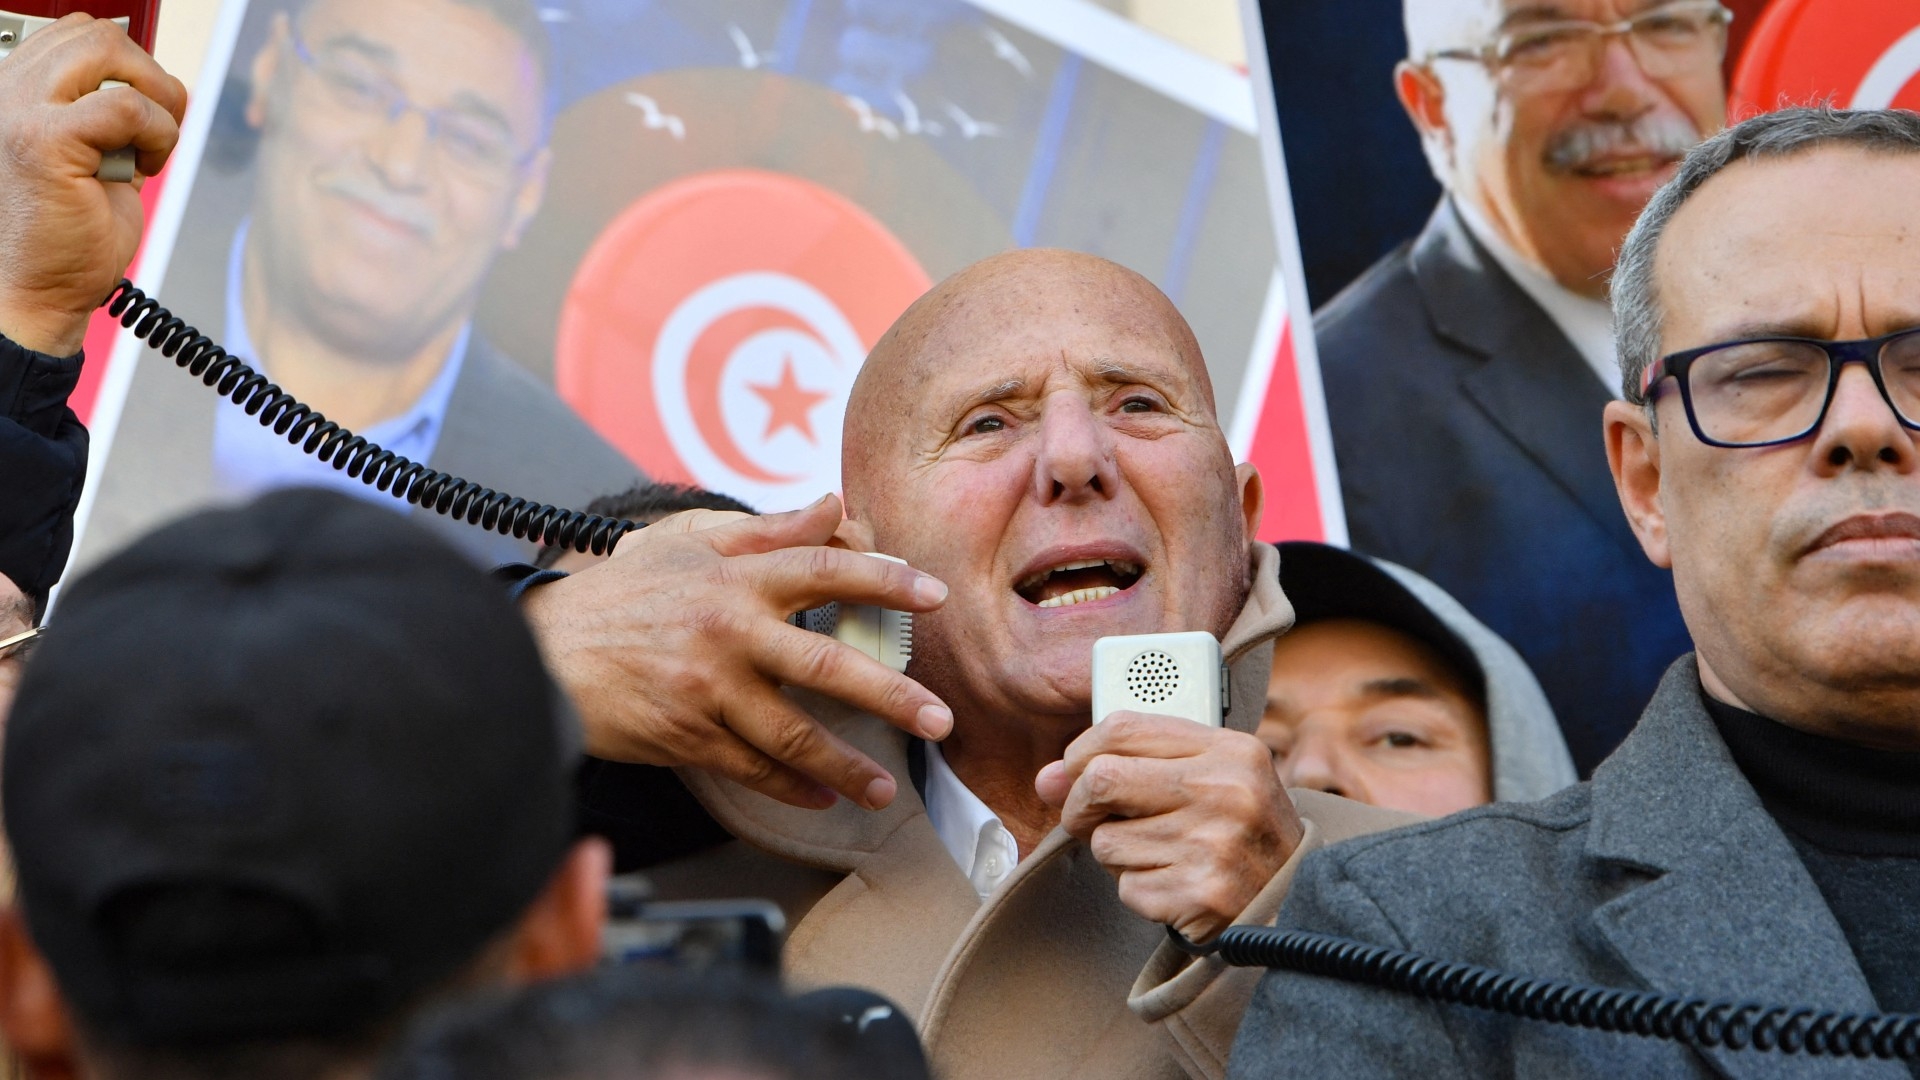 Ahmed Nejib Chebbi, leader of the opposition National Salvation Front, during in a demonstration in Tunis, Tunisia on 5 March 2023 (AFP)